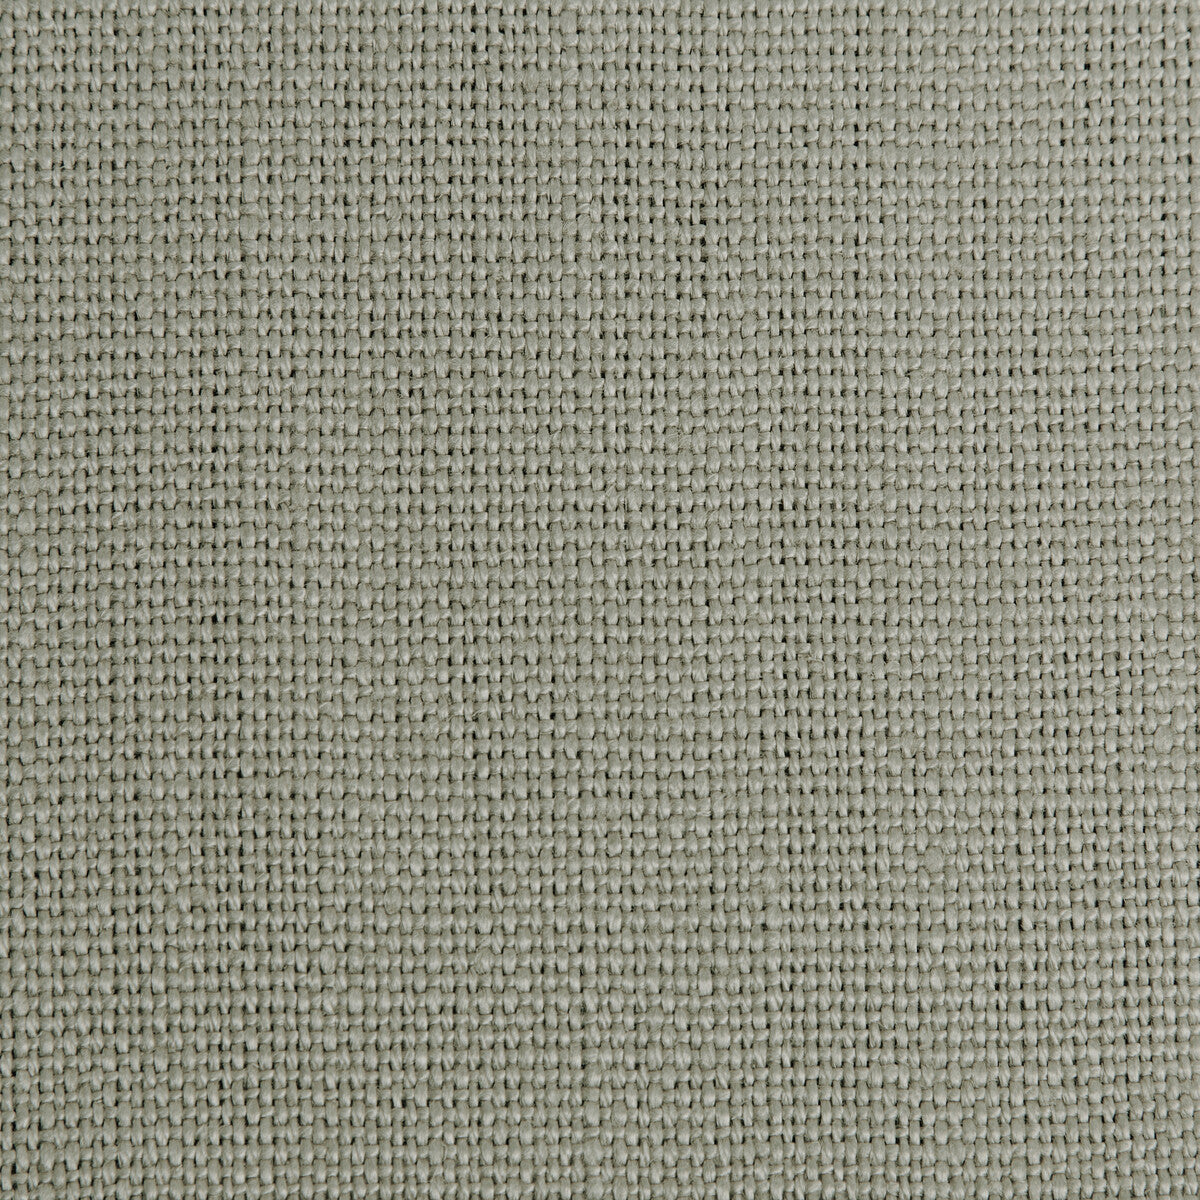 Stone Harbor fabric in cement color - pattern 27591.1121.0 - by Kravet Basics